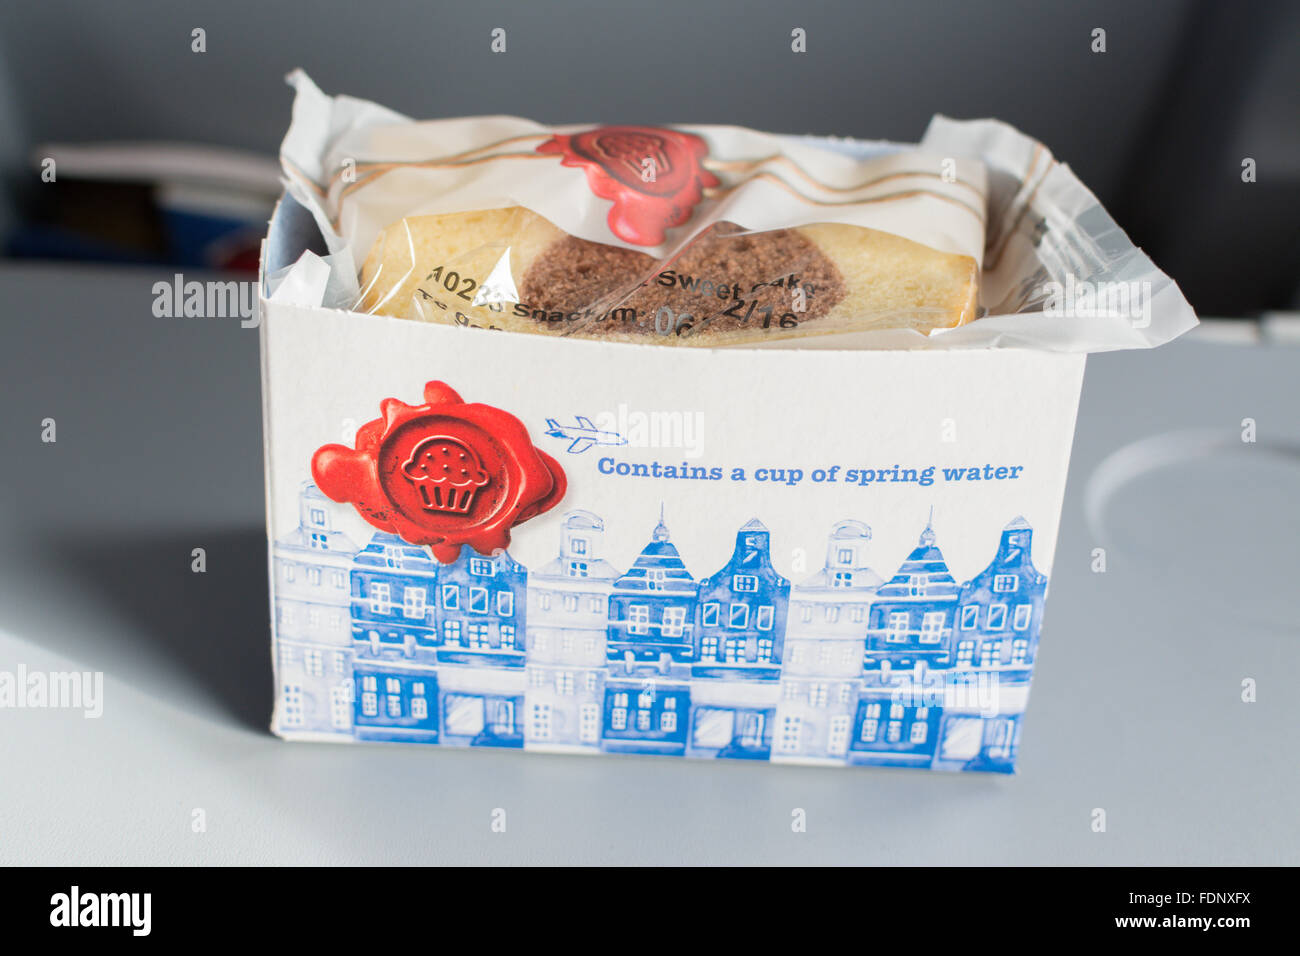 Complimentary snack of cake and water provided on KLM flight between Amsterdam and Stockholm Stock Photo